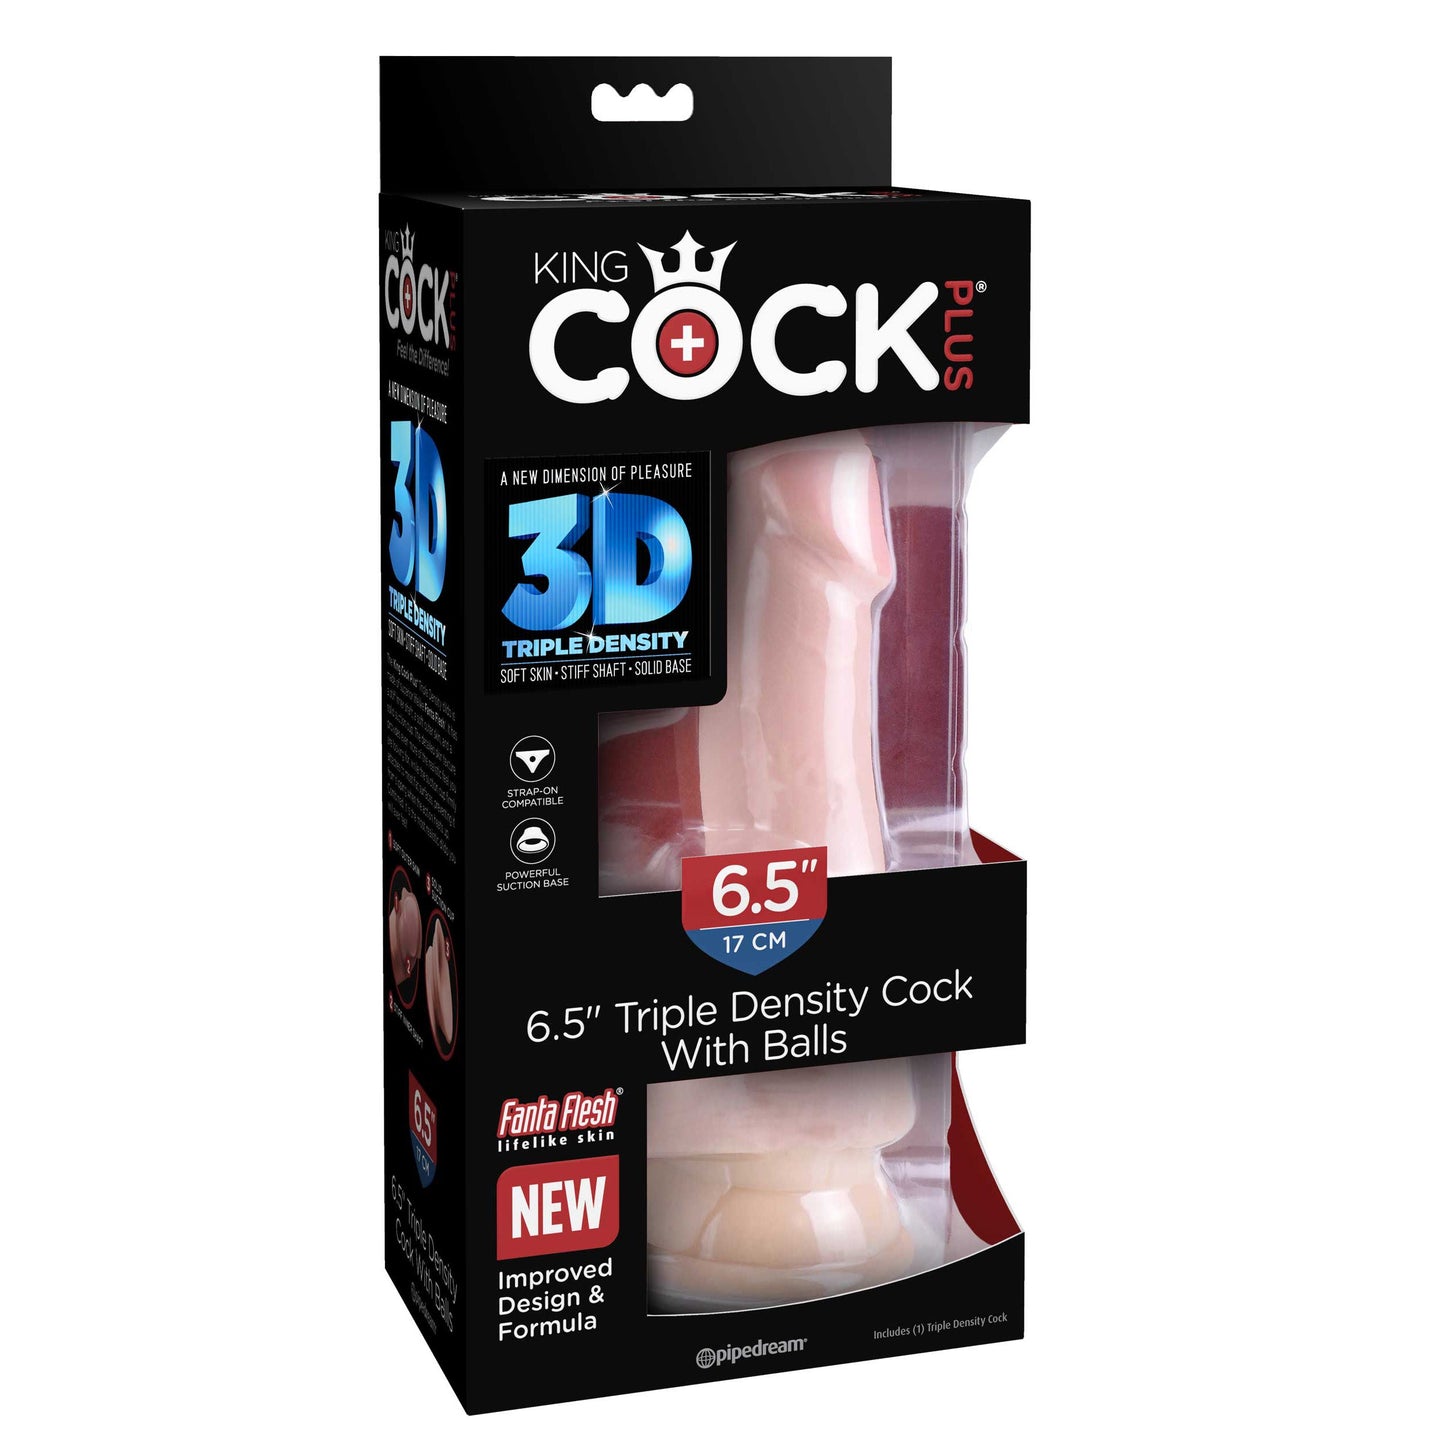 King Cock Plus 6.5" Triple Density Cock with Balls - Light - Thorn & Feather Sex Toy Canada